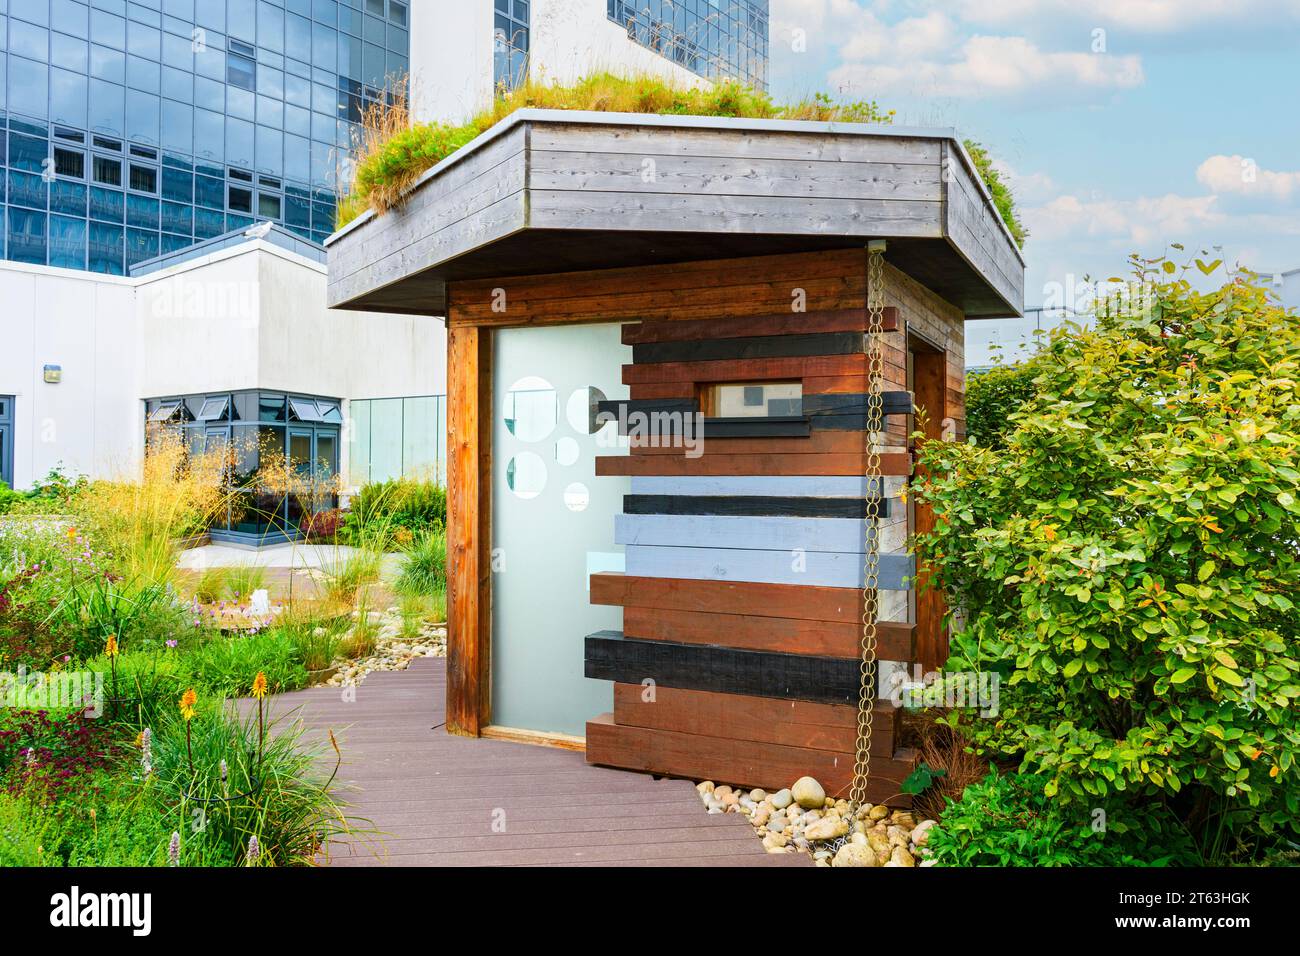 The Pavilion shelter on the Roof Garden at Aberdeen Royal Infirmary, Scotland, UK.  Design:  Nigel Dunnett.  Opened by Queen Elizabeth II, 2017 Stock Photo